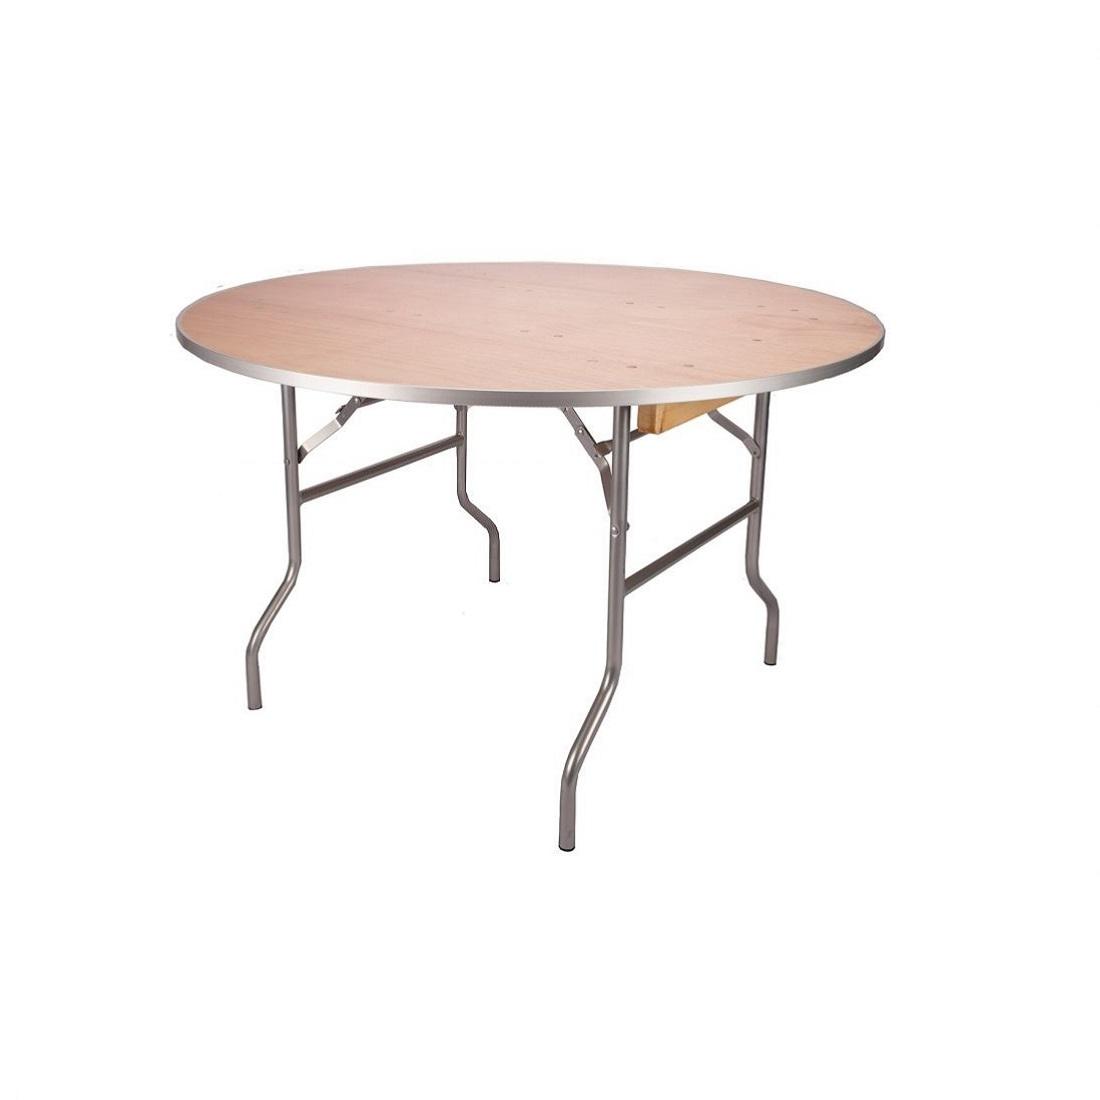 48" Round Wood Table